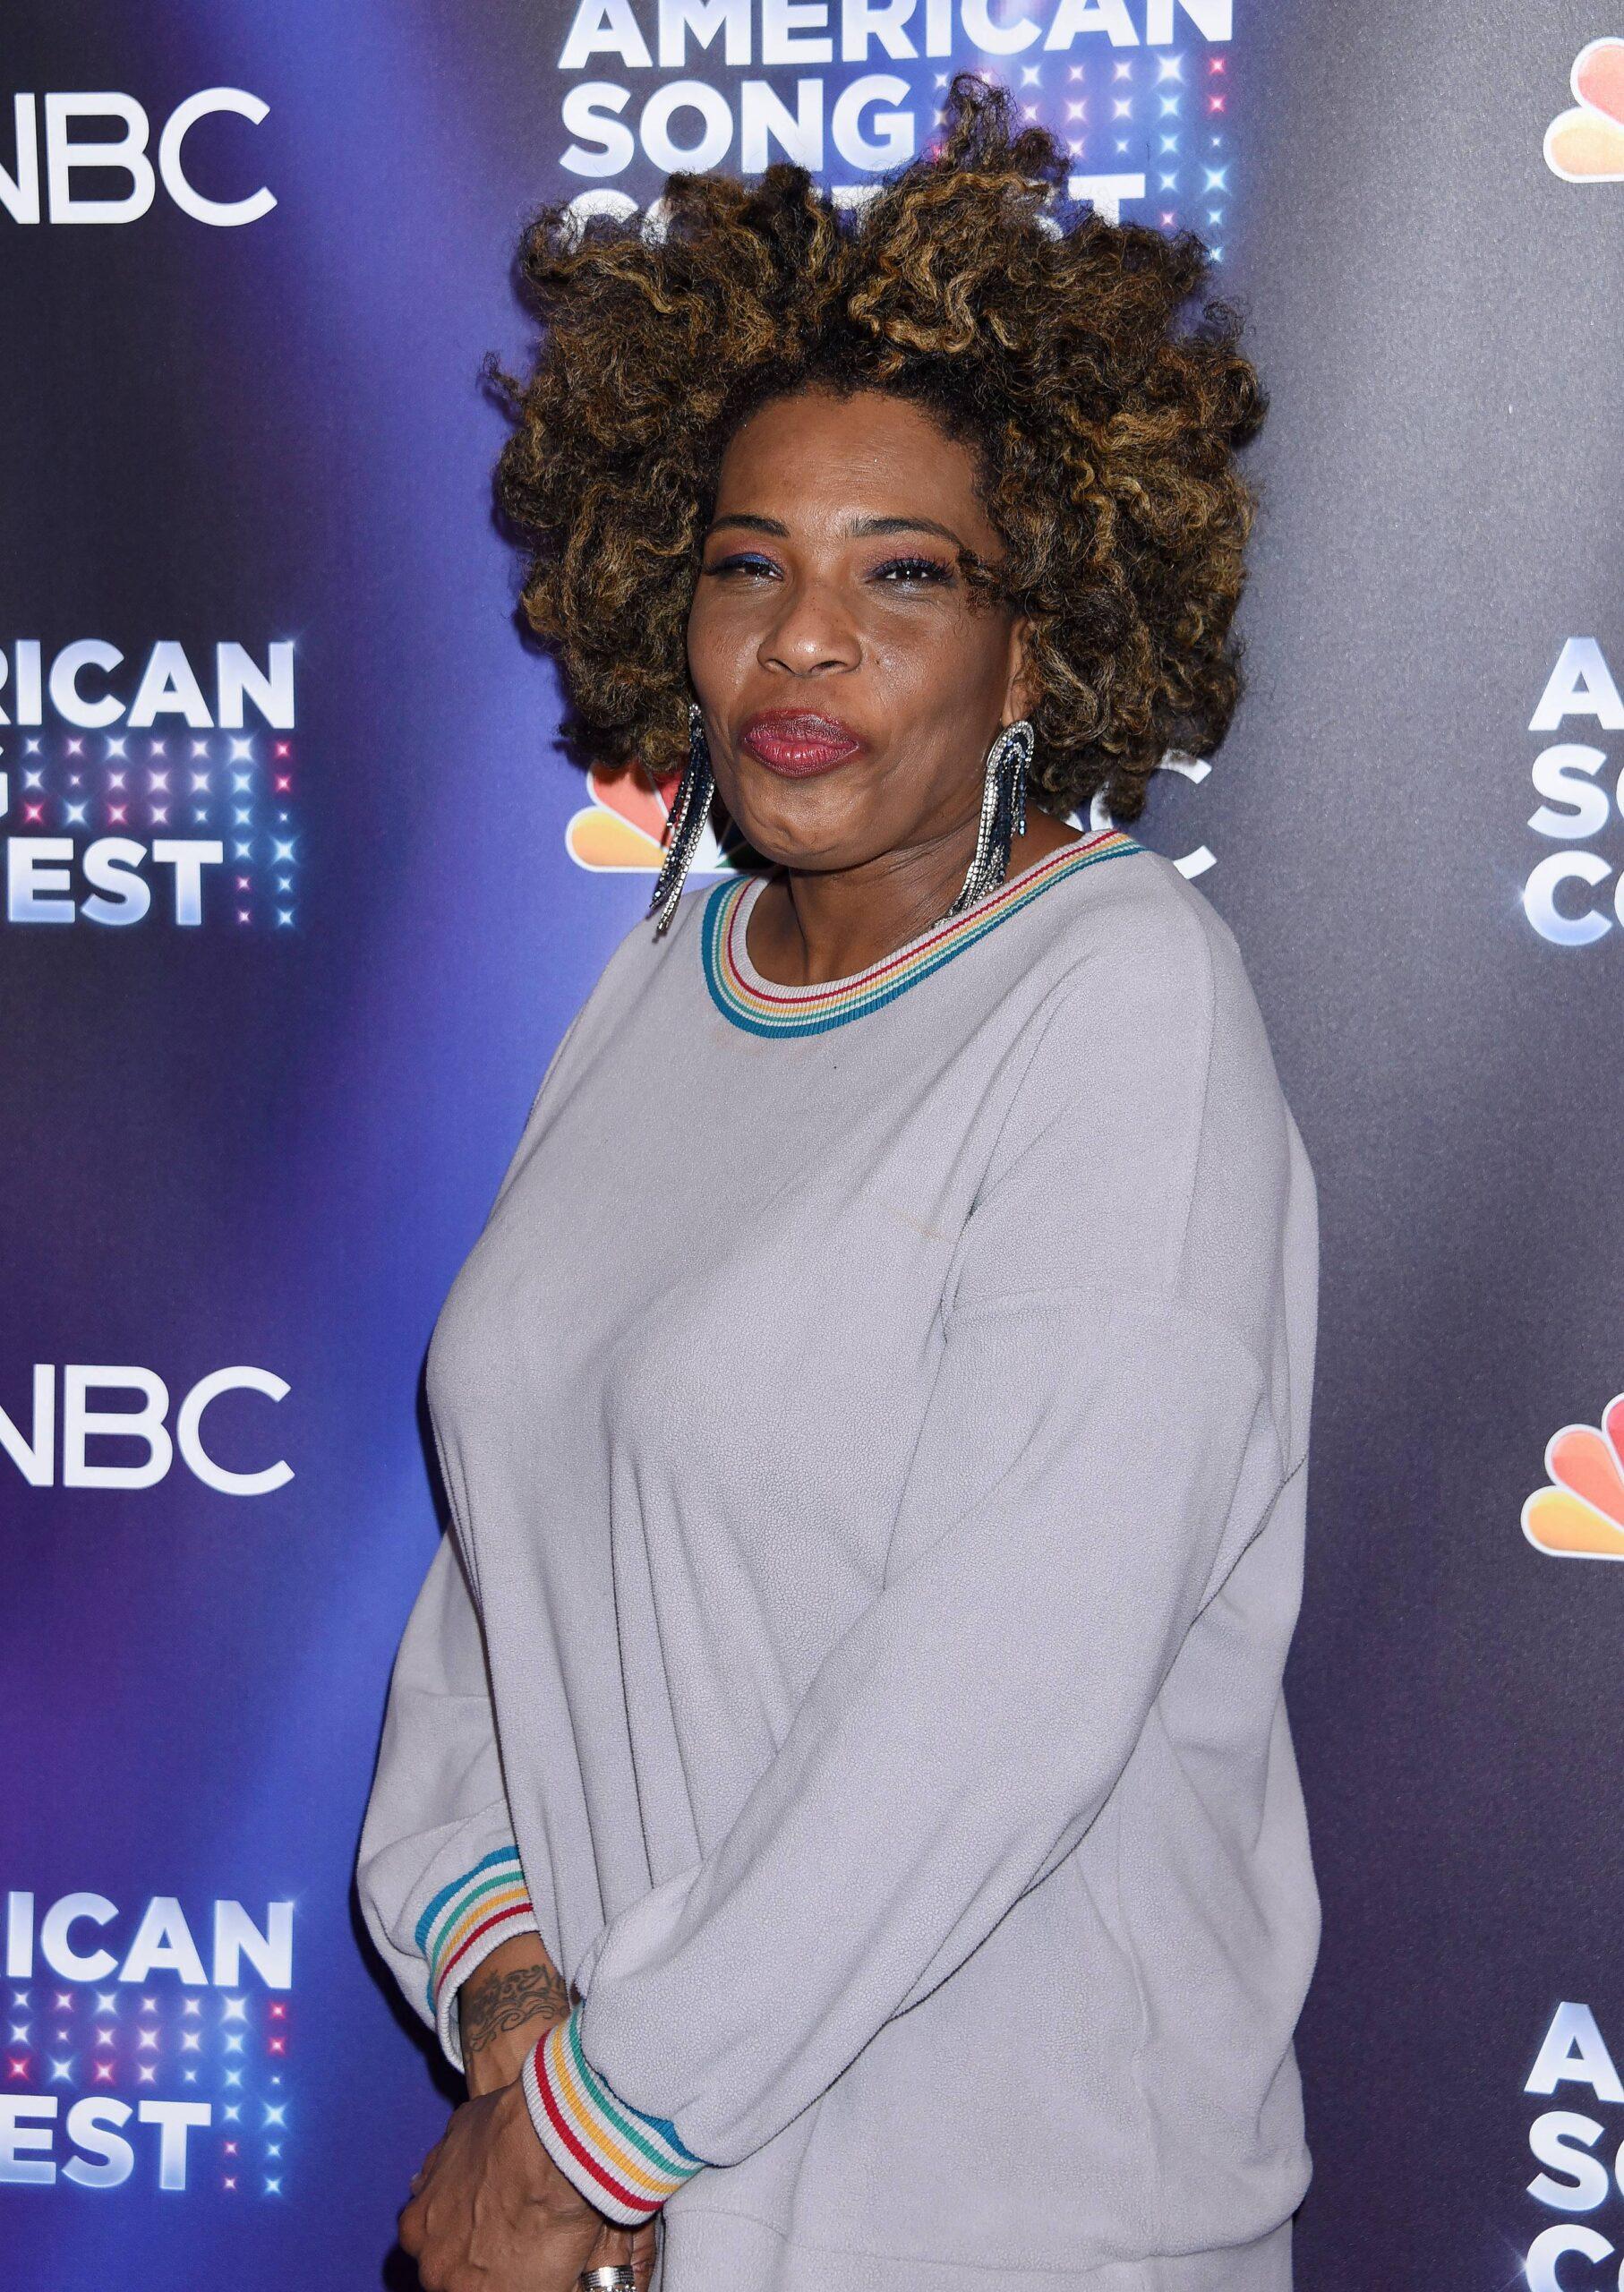 Macy Gray Denies Being Abused By Her Son, Says They 'Love Each Other'